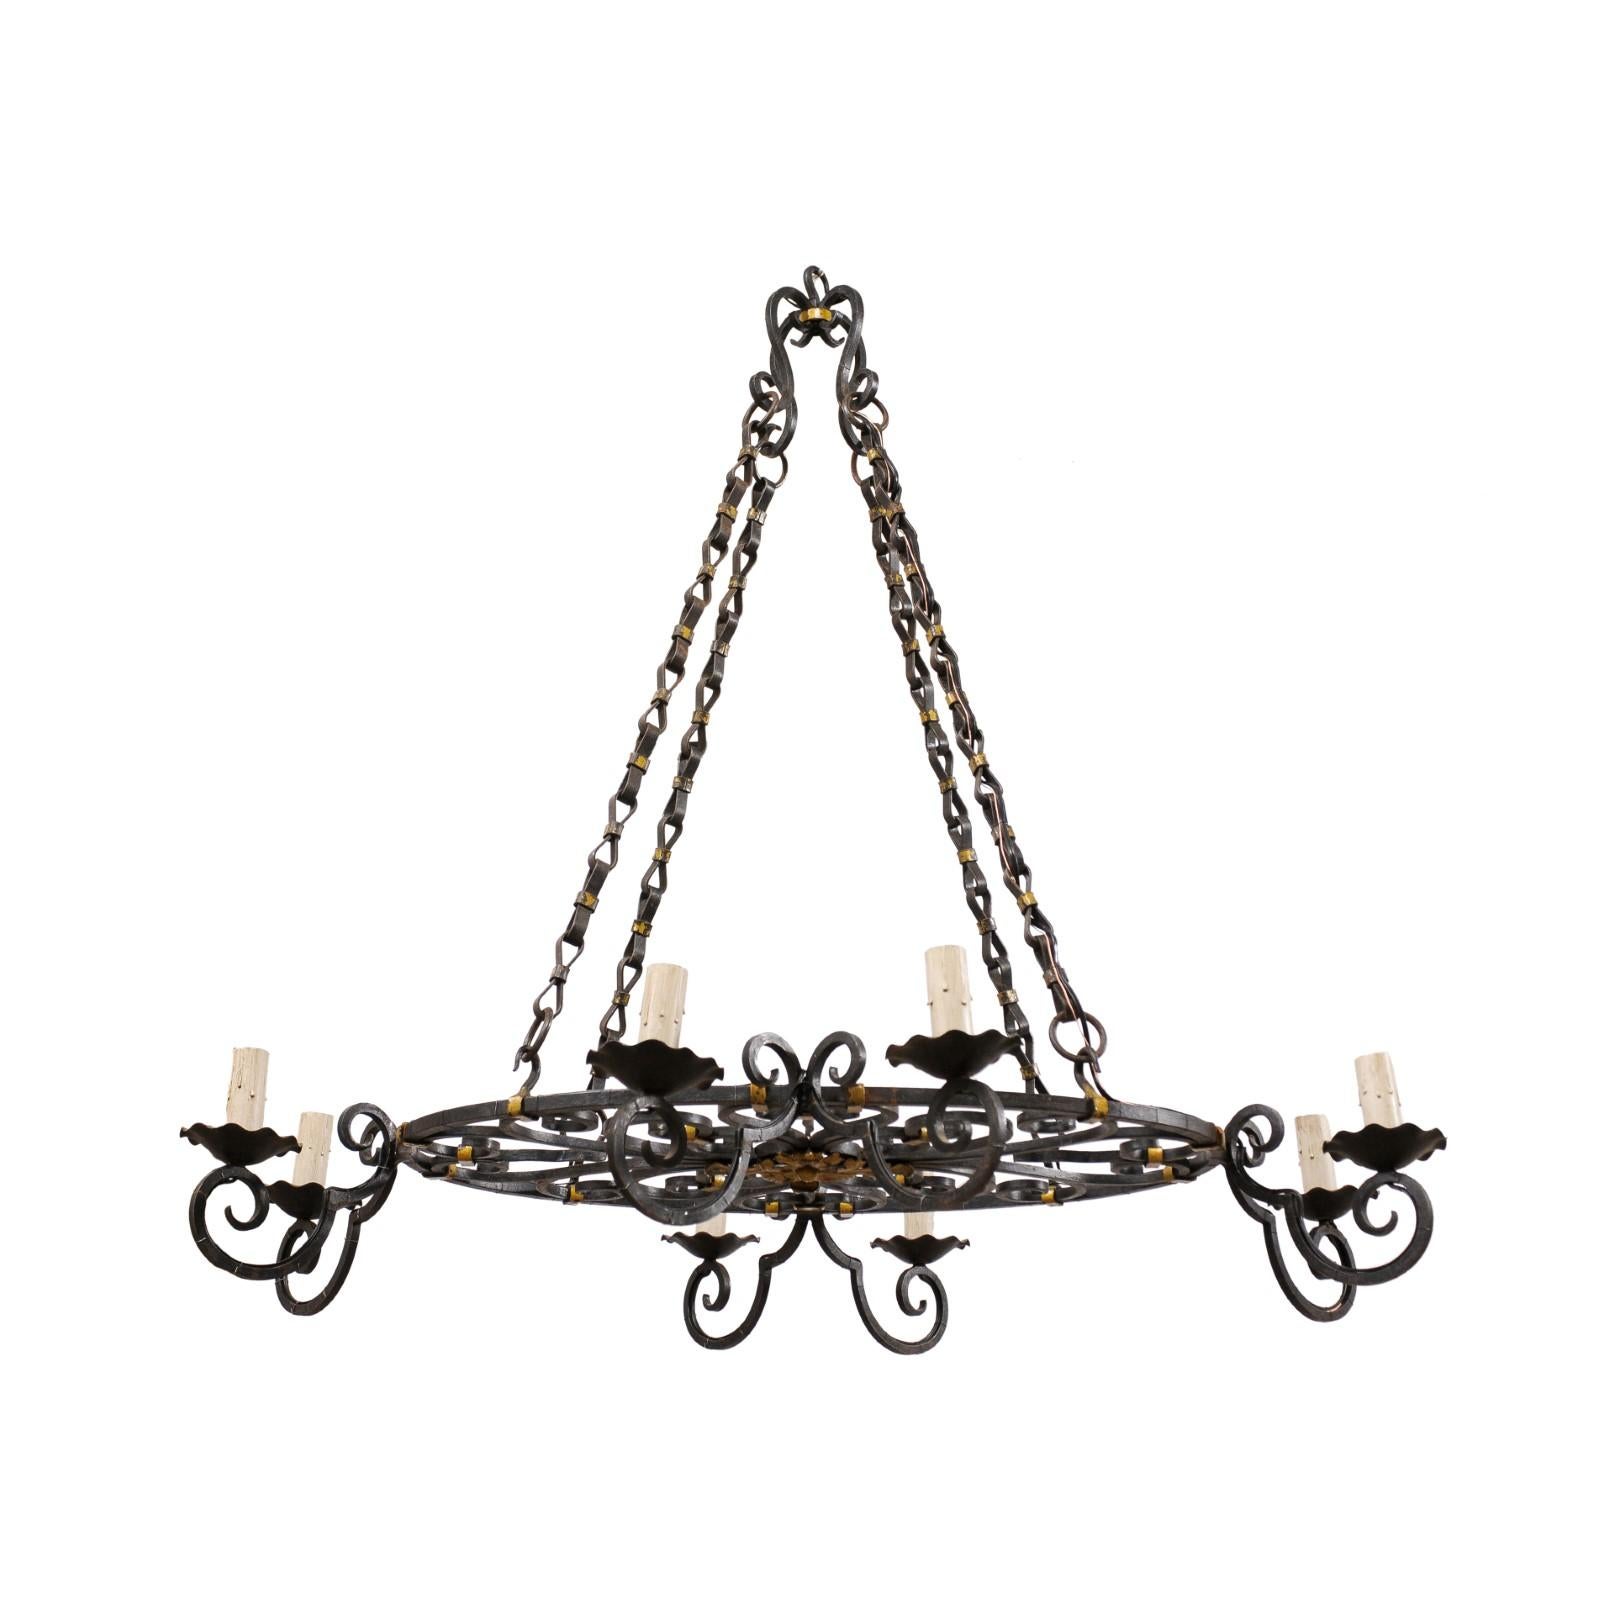 French Oval-Shaped, 8-Light, Forged-Iron Chandelier with Gold Accents